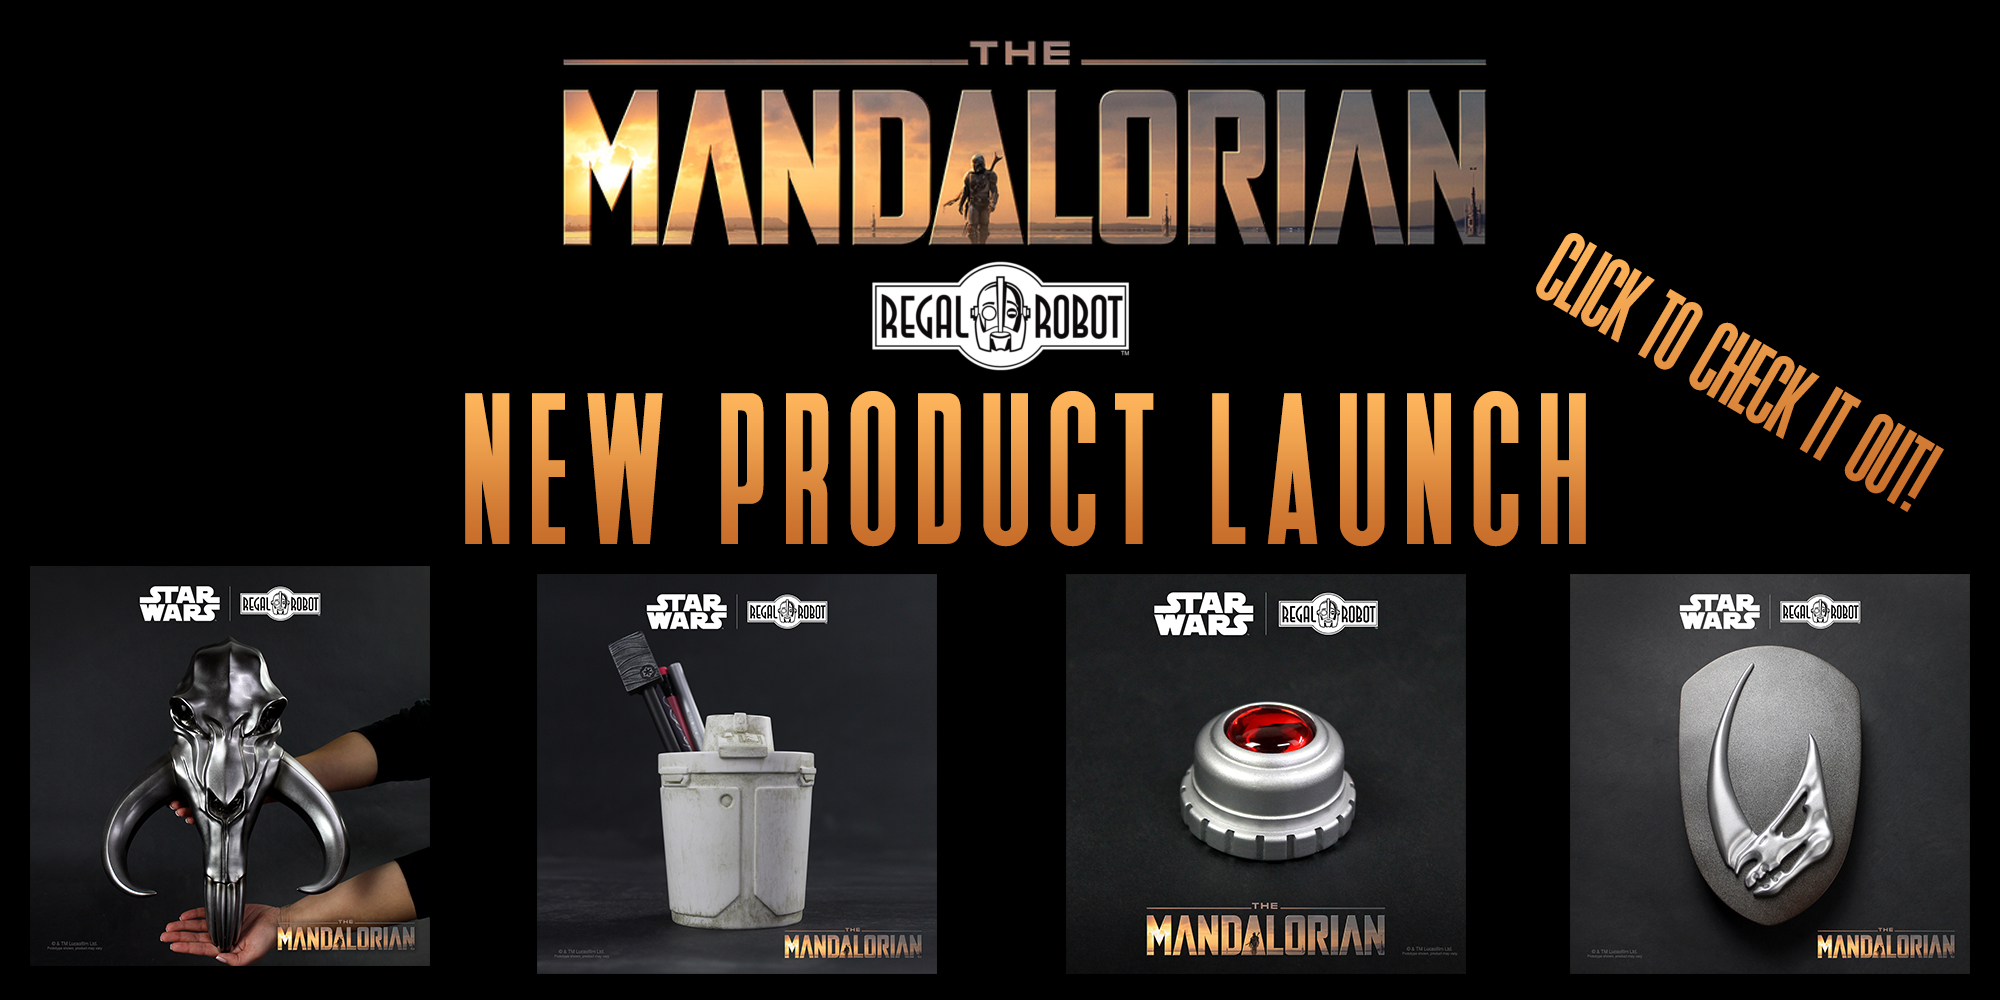 New Mandalorian Products By Regal Robot!